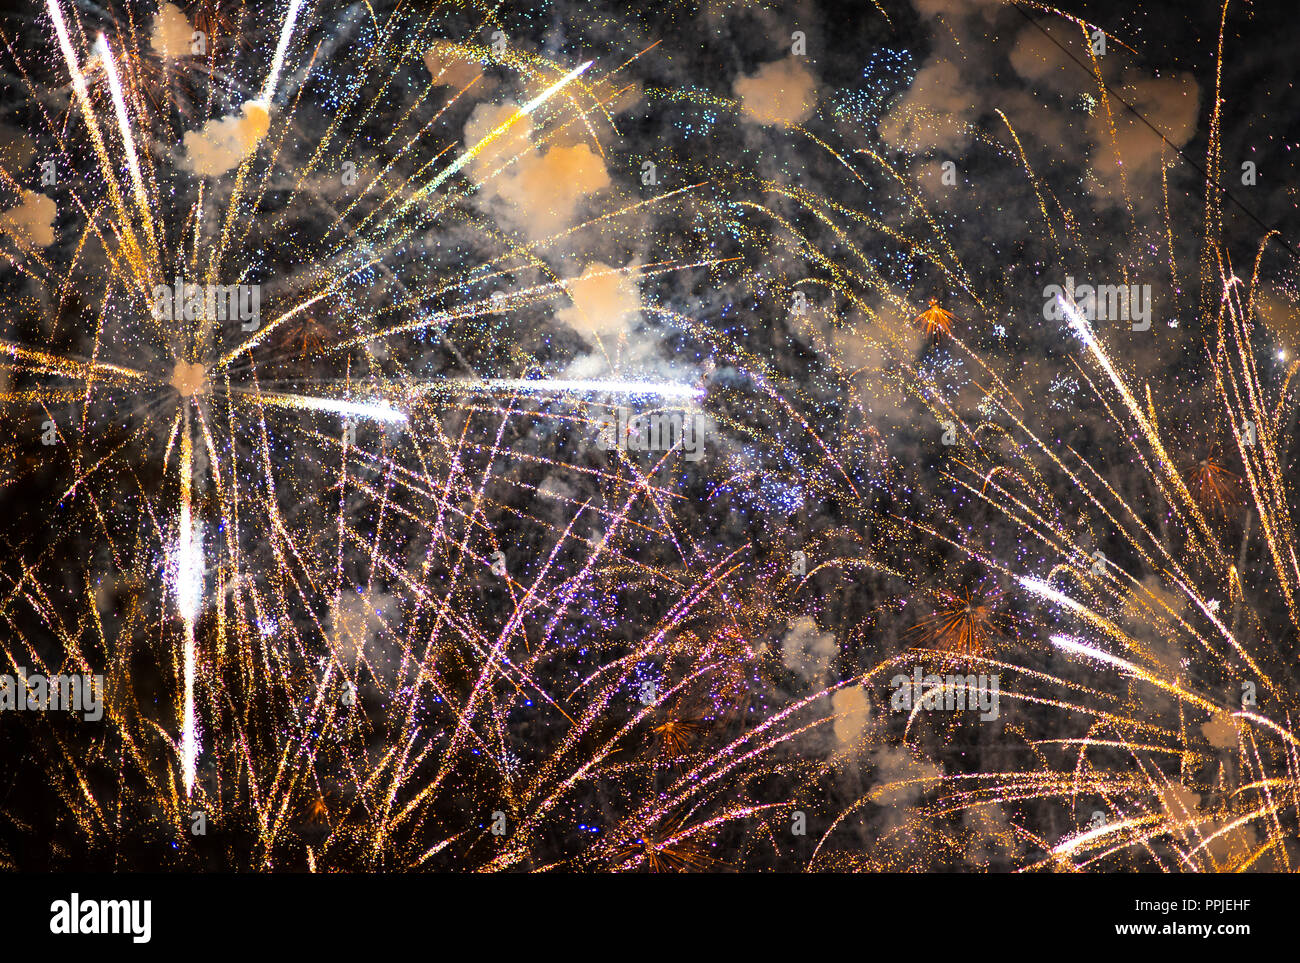 Salute in the night sky. Bright texture of festive fireworks. Abstract holiday background with various colors fireworks light. New Year's, Christmas l Stock Photo